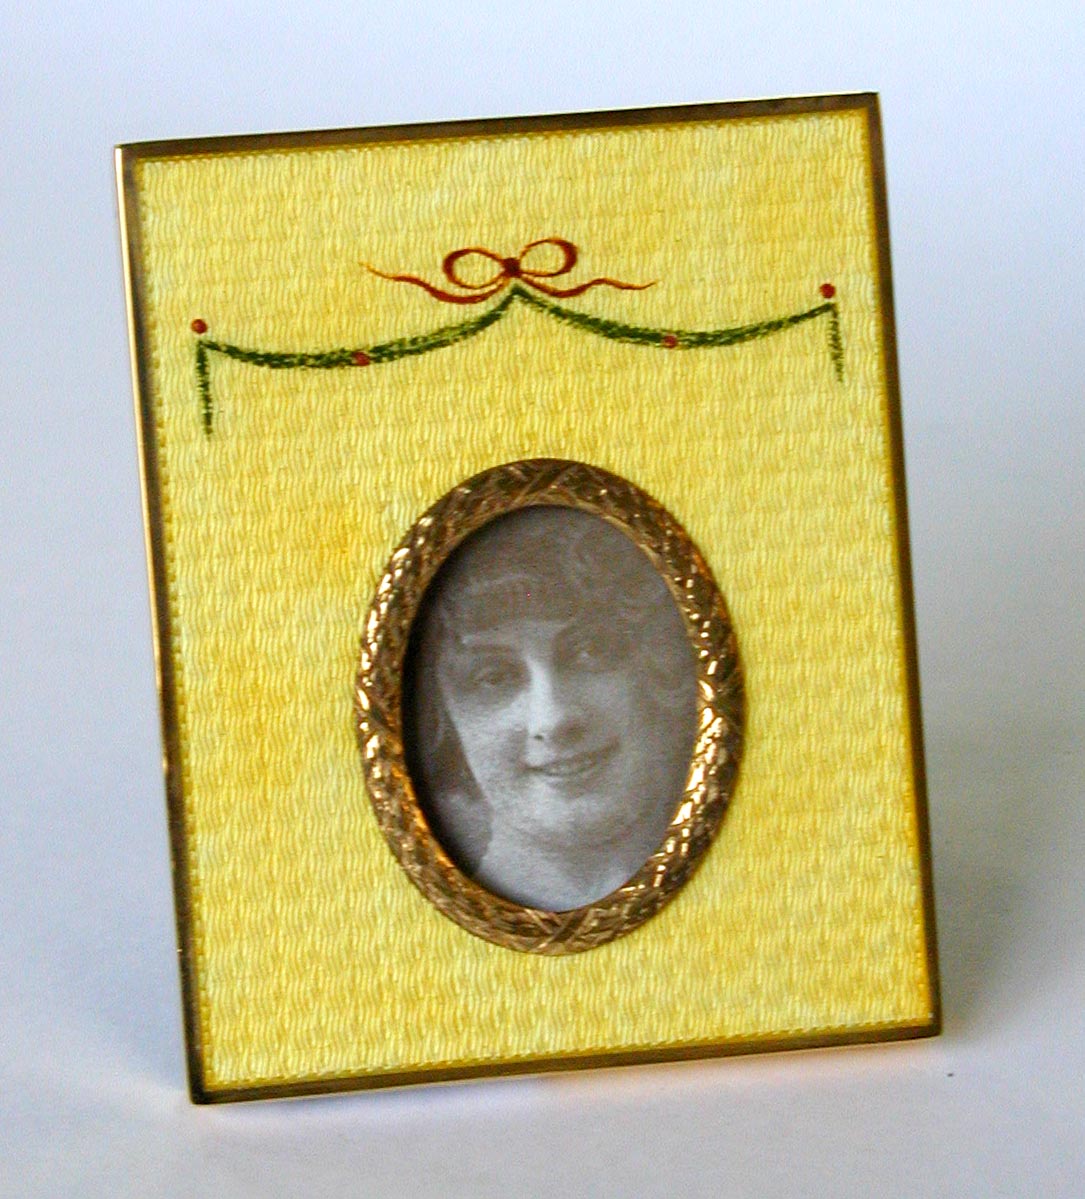 Rectangular photo frame in sterling silver 925/1000 gold plated with translucent fired enamels on guillochè with hand-painted floral miniature, and oval ornament around the opening, Russian Empire Fabergè style. Blue velvet panel. External measure cm. 8 x 10. Oval interior cm. 3.1 x 4.2. Weight gr. 123. Produced in Florence at the Salimbeni company headquarters in 1969